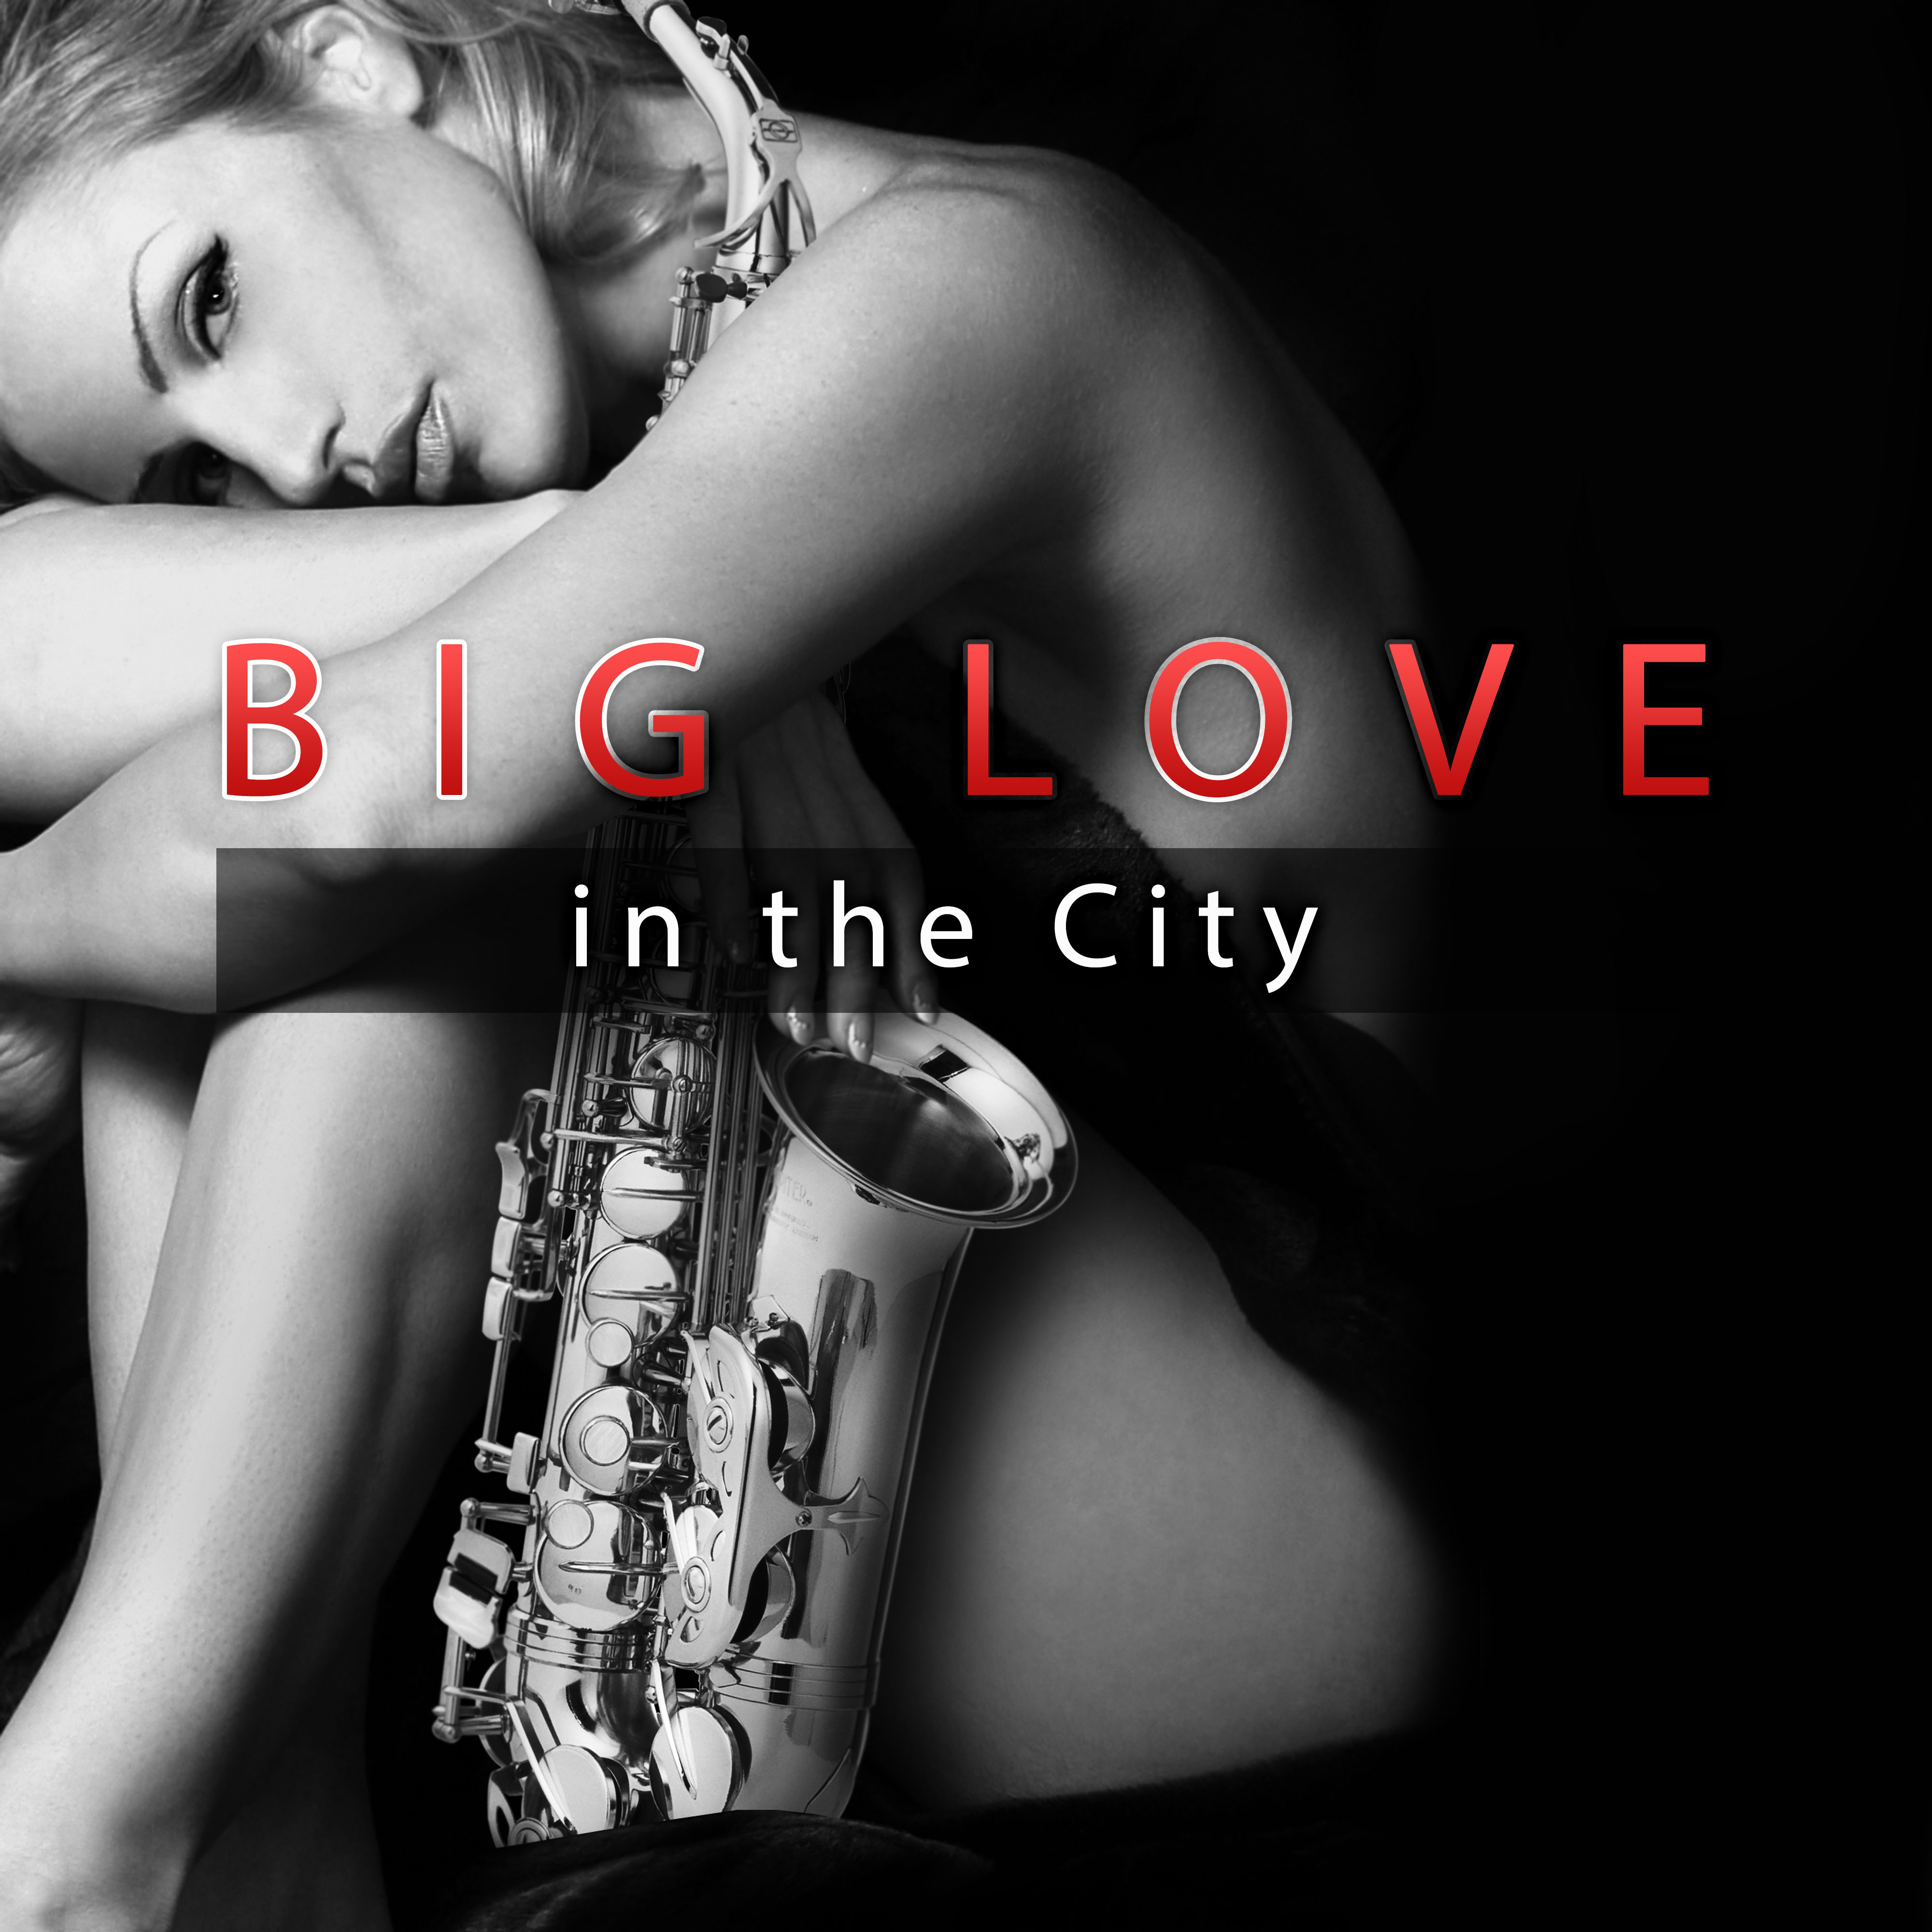 Big Love in the City  Vibes of Jazz, Sensual Music for Lovers, Special Date in Candlelight